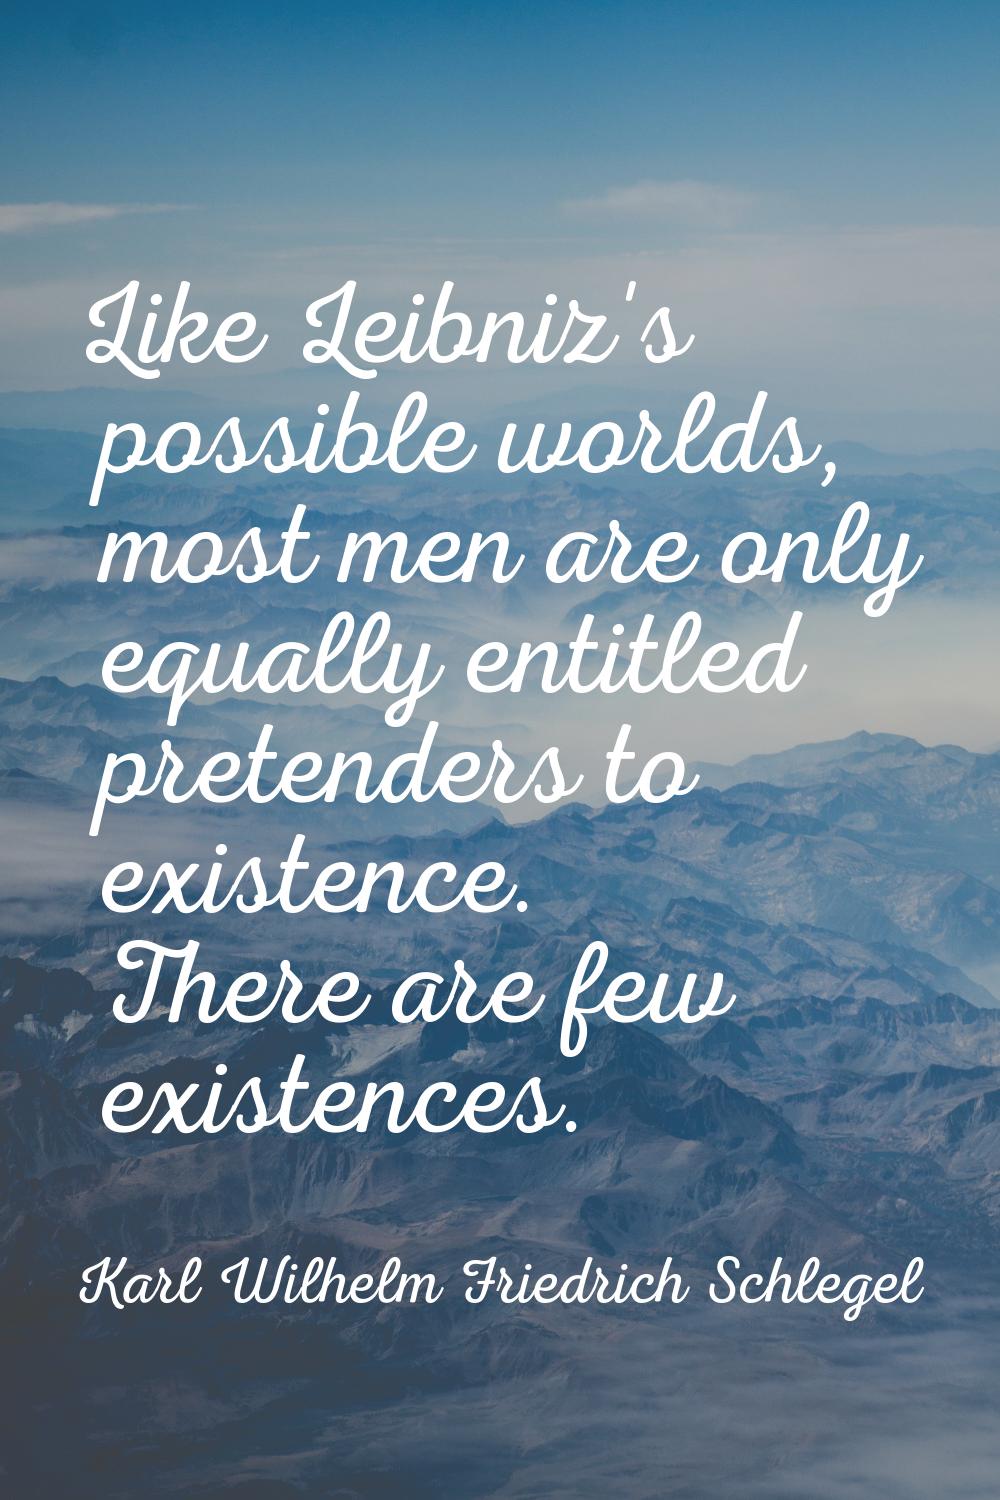 Like Leibniz's possible worlds, most men are only equally entitled pretenders to existence. There a